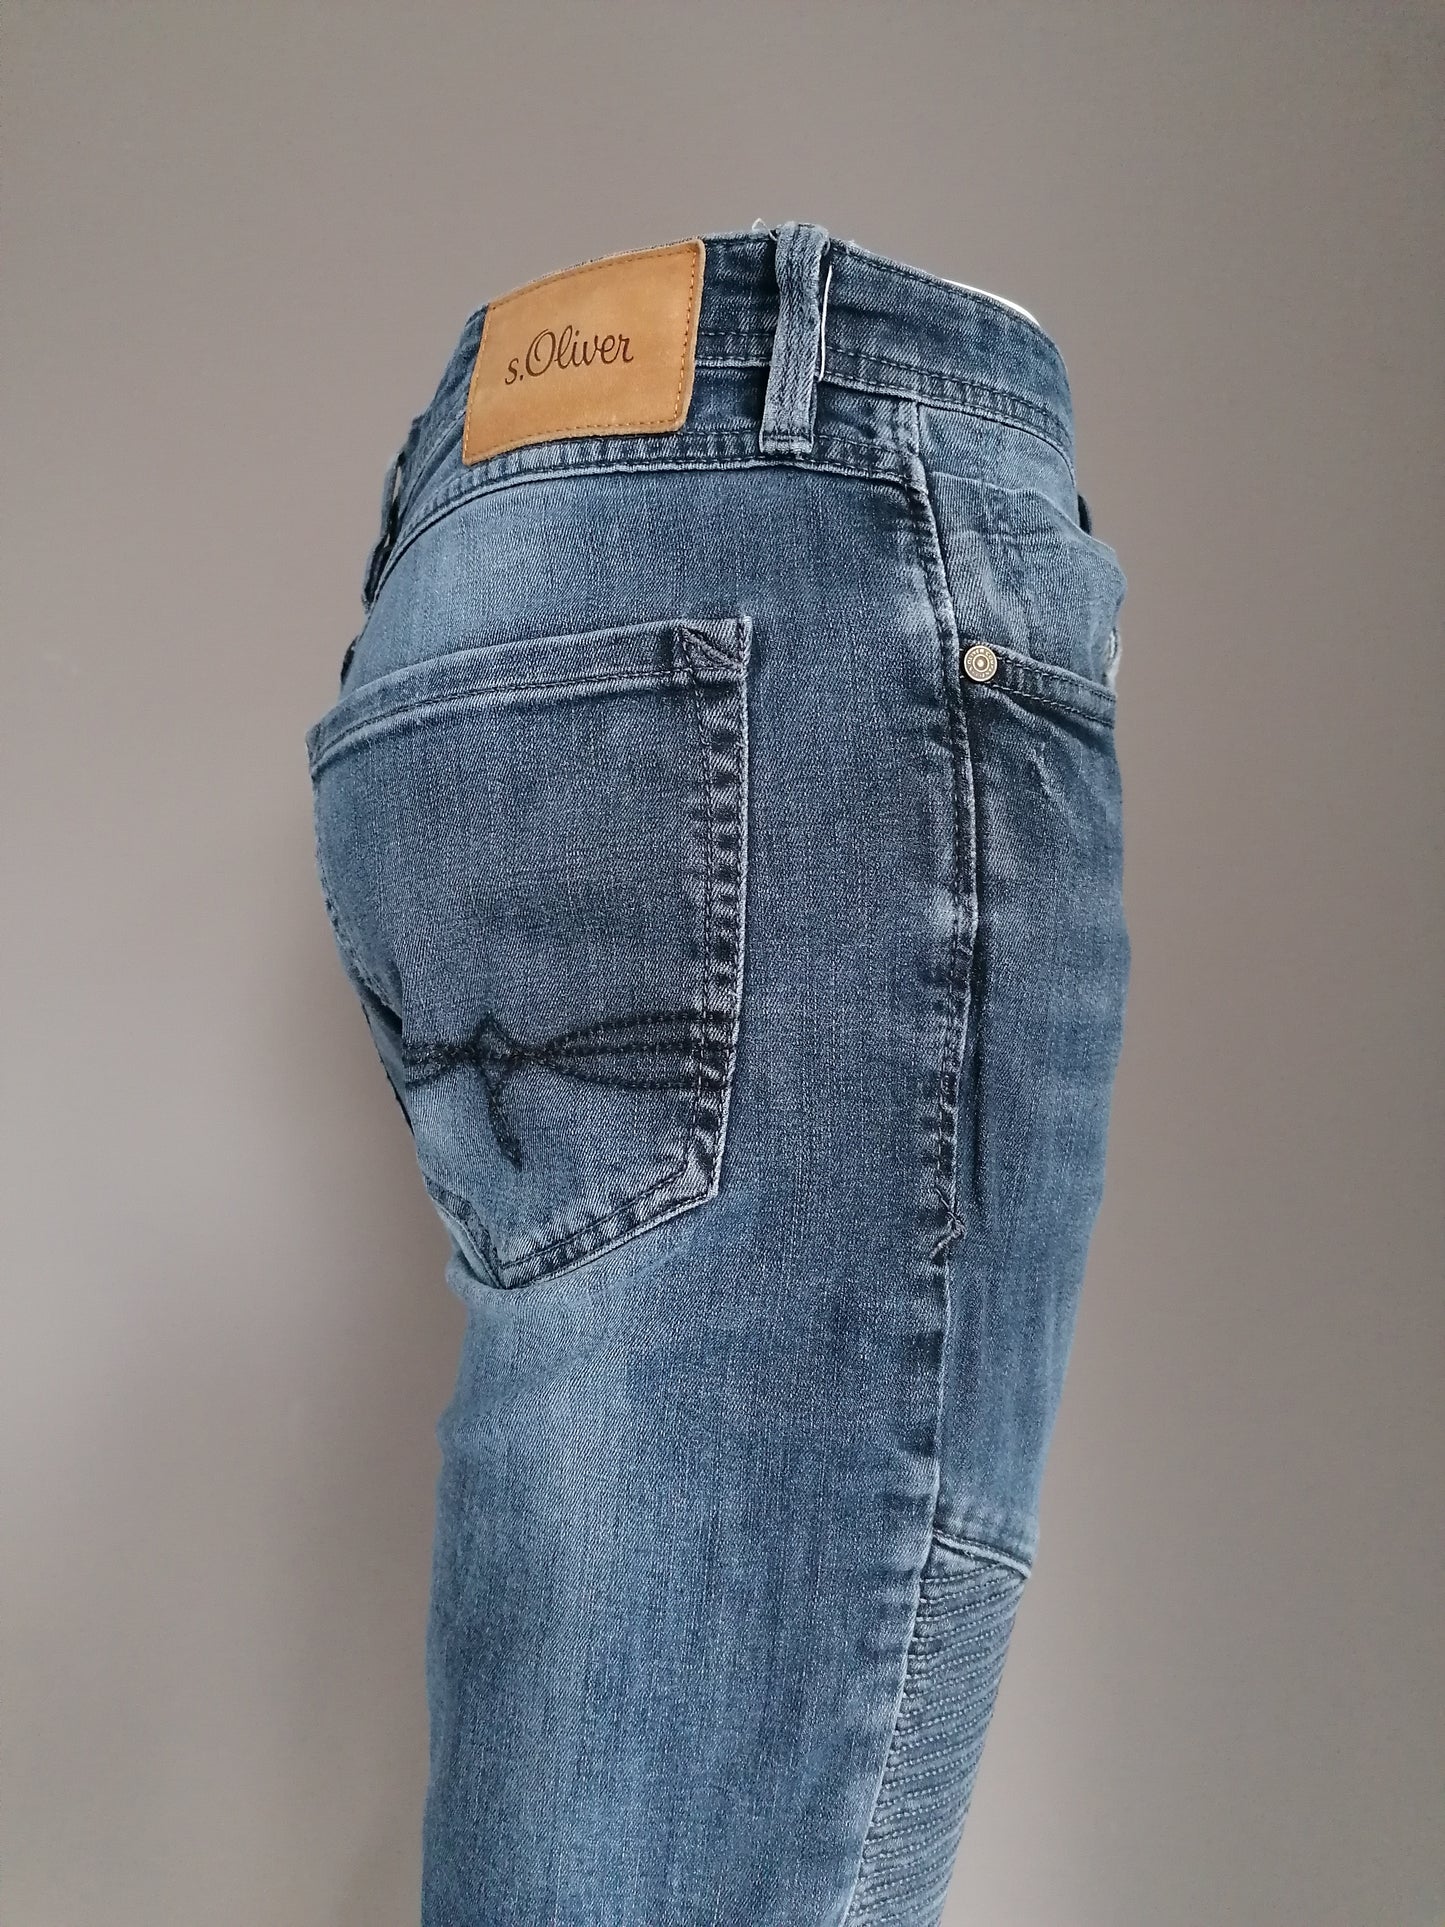 s. Oliver jeans. Donker Blauw. Slim Fit. Maat W32 - L28. Type "Close"